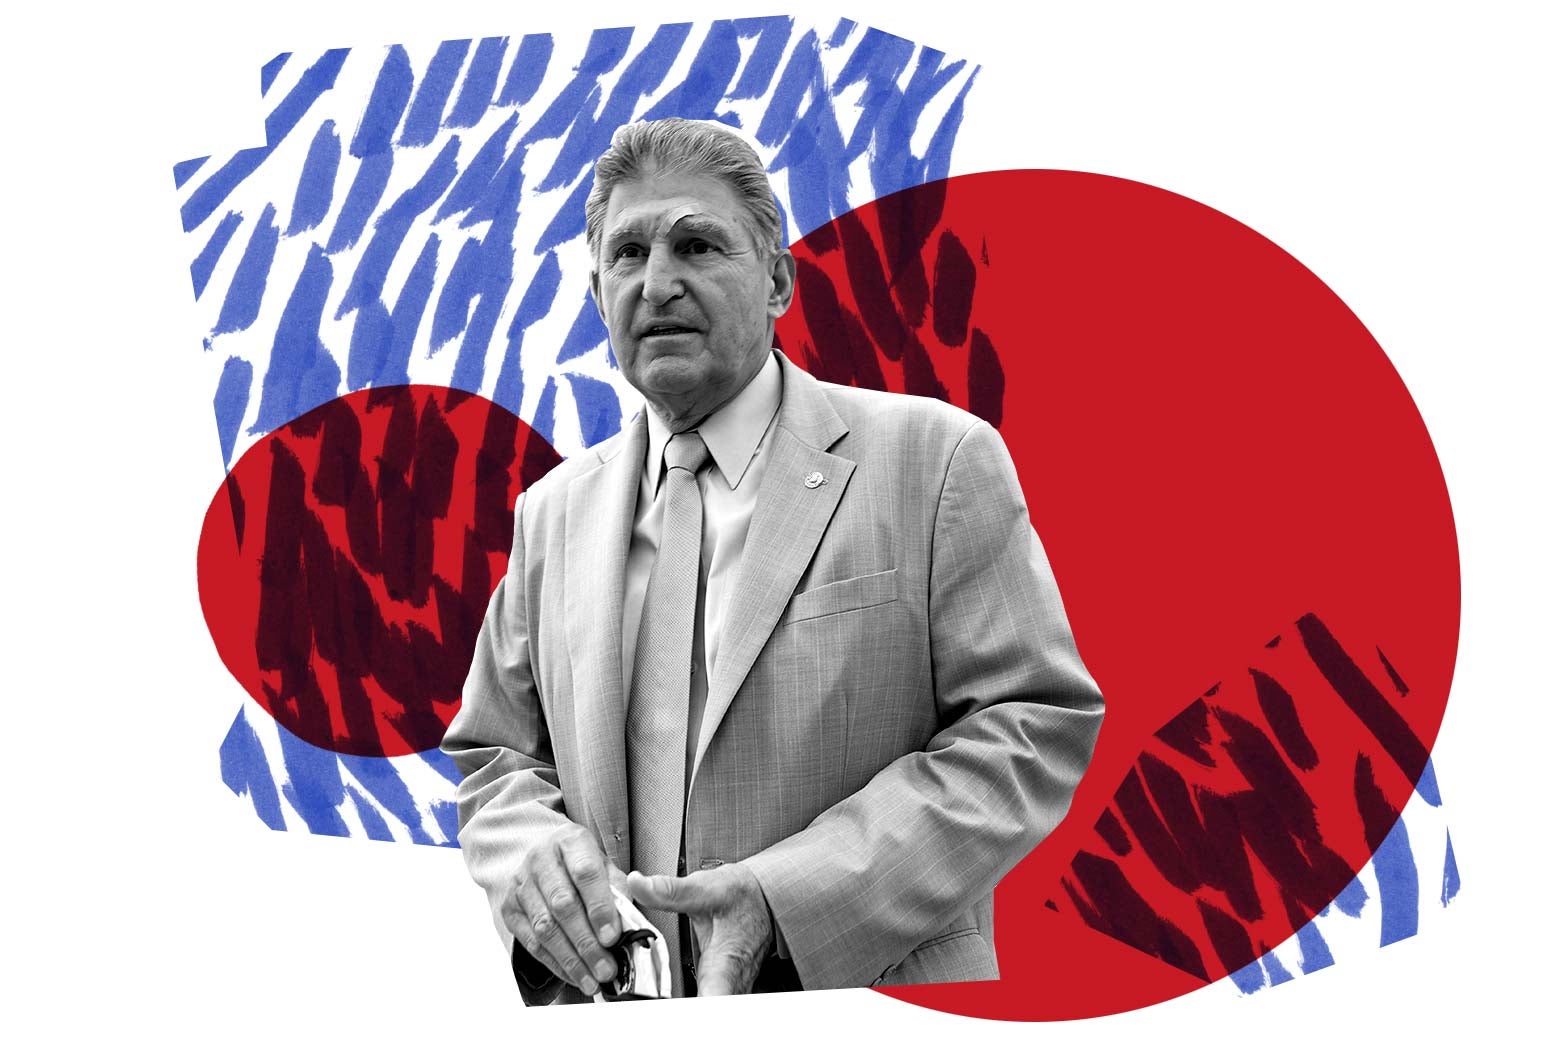 Joe Manchin is seen in front of red circles and blue lines.